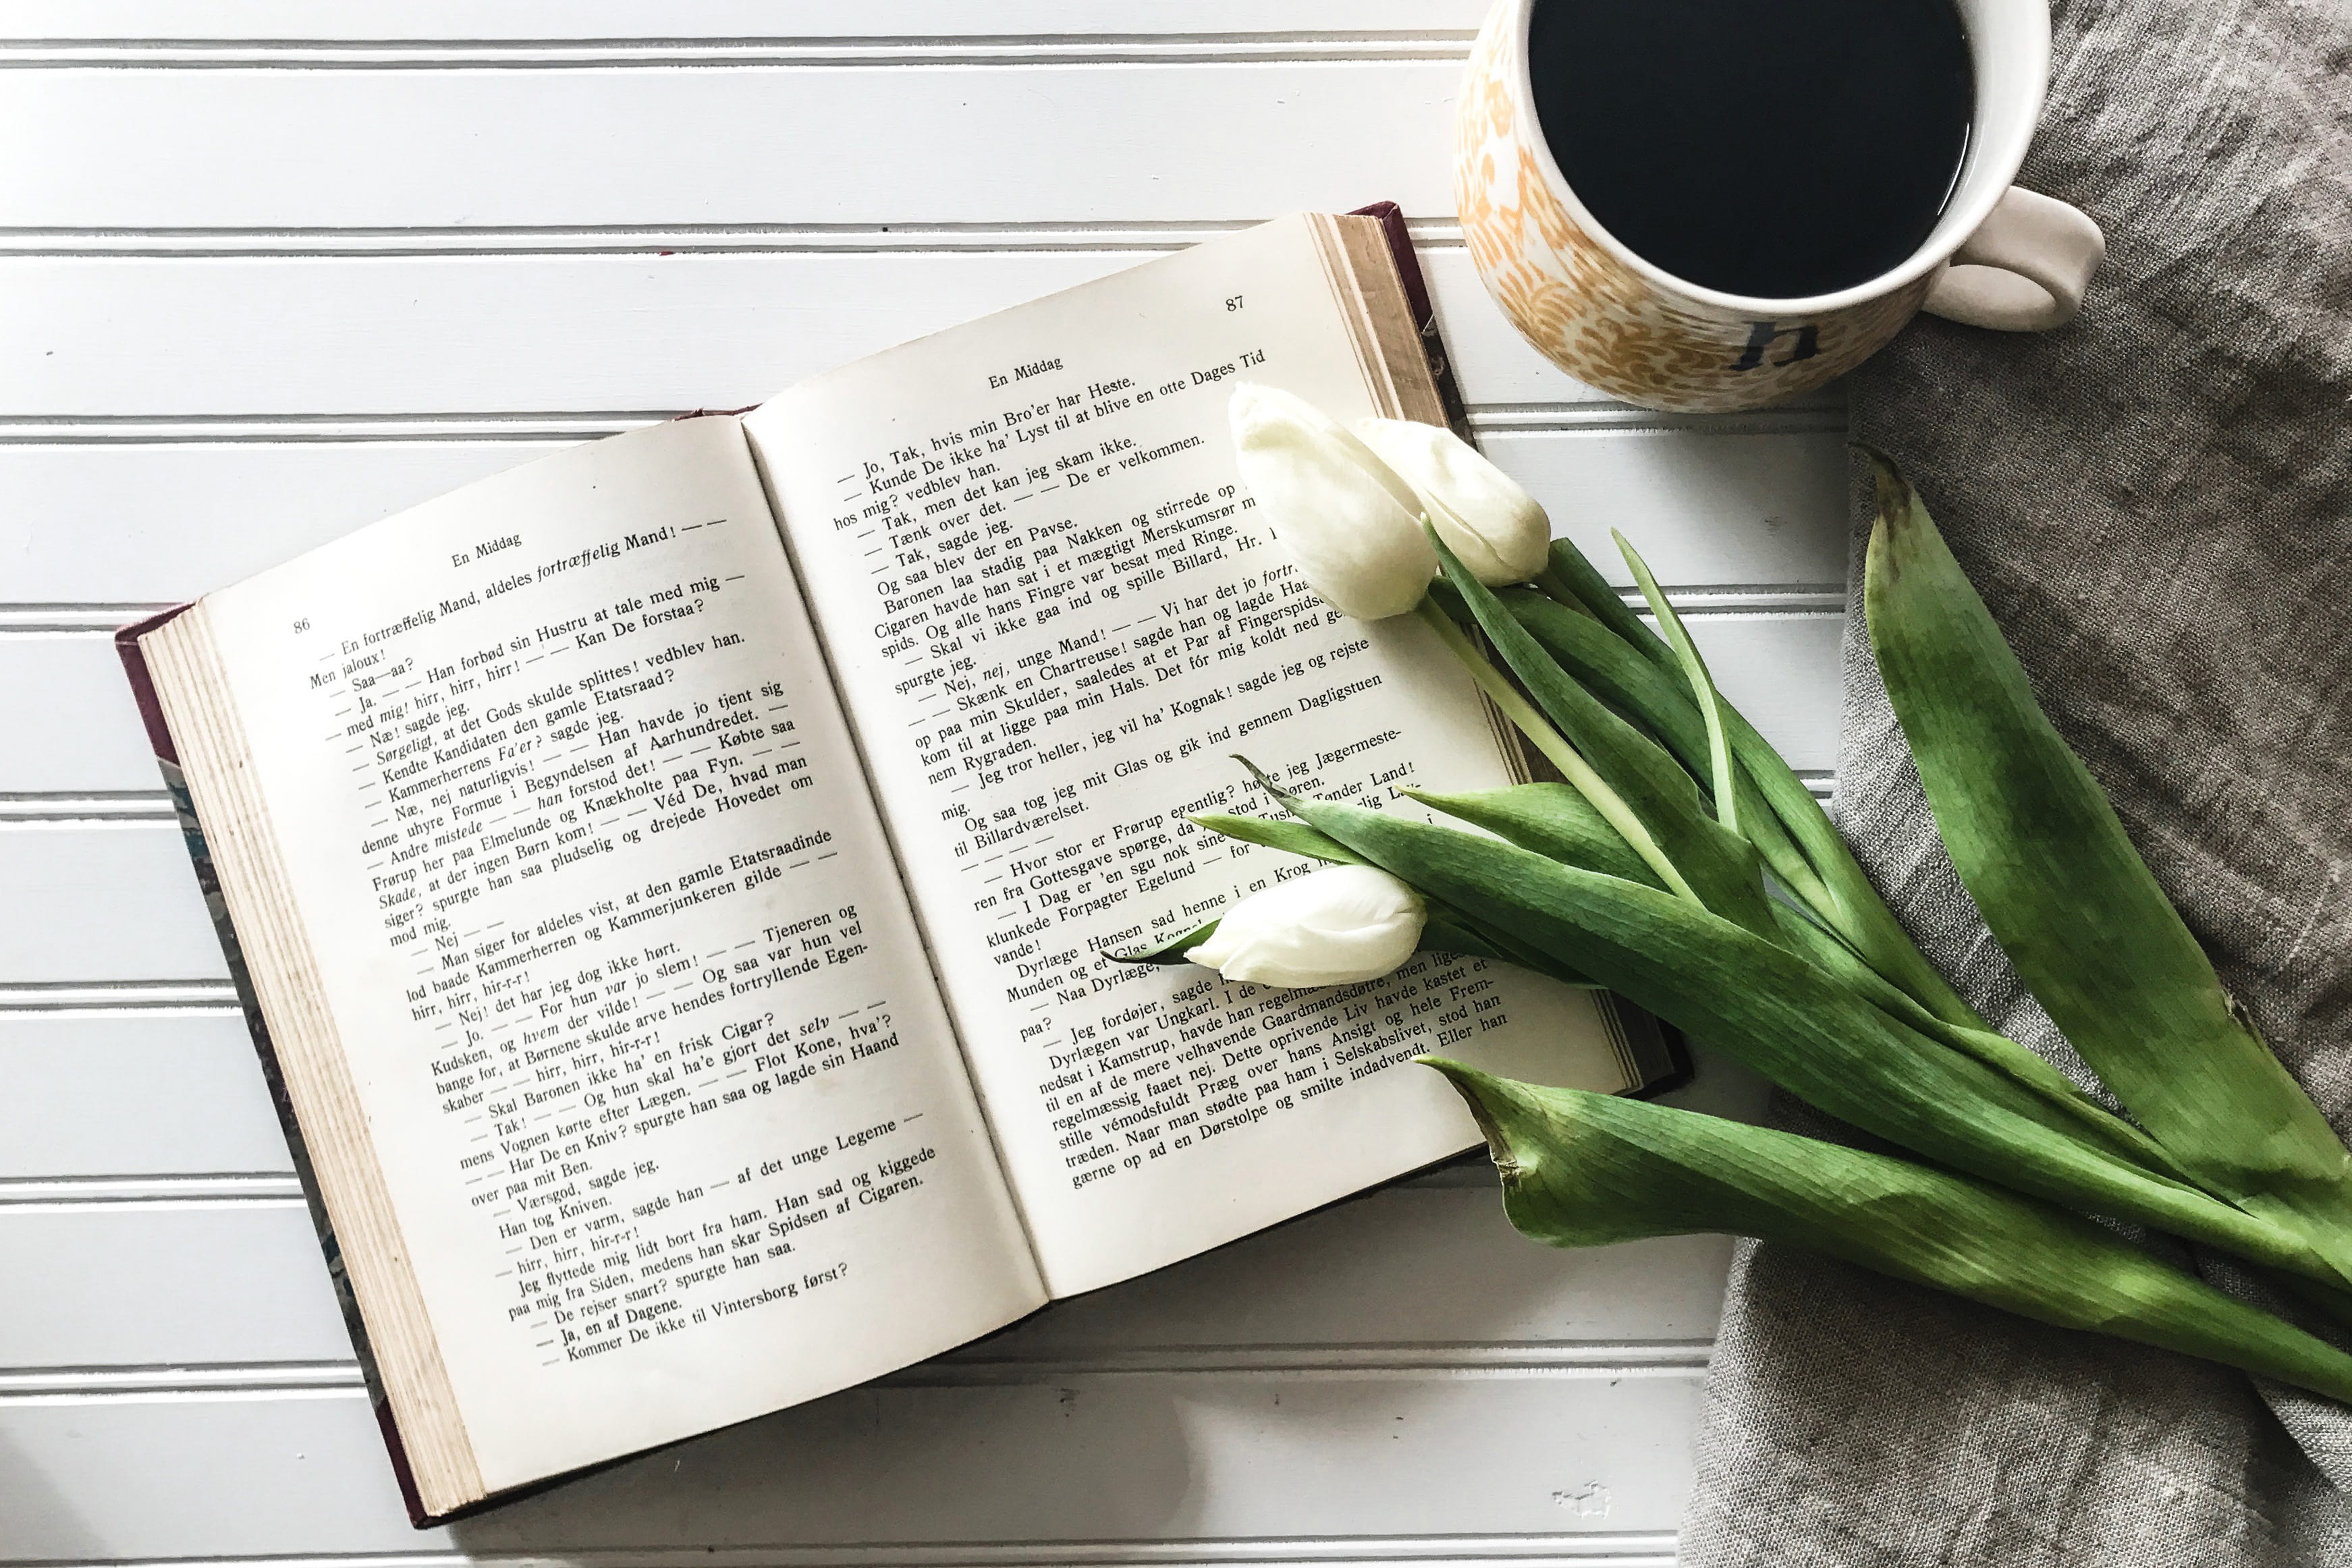 Coffee, Flowers and Open Book, food and Drink, books, hD Wallpaper